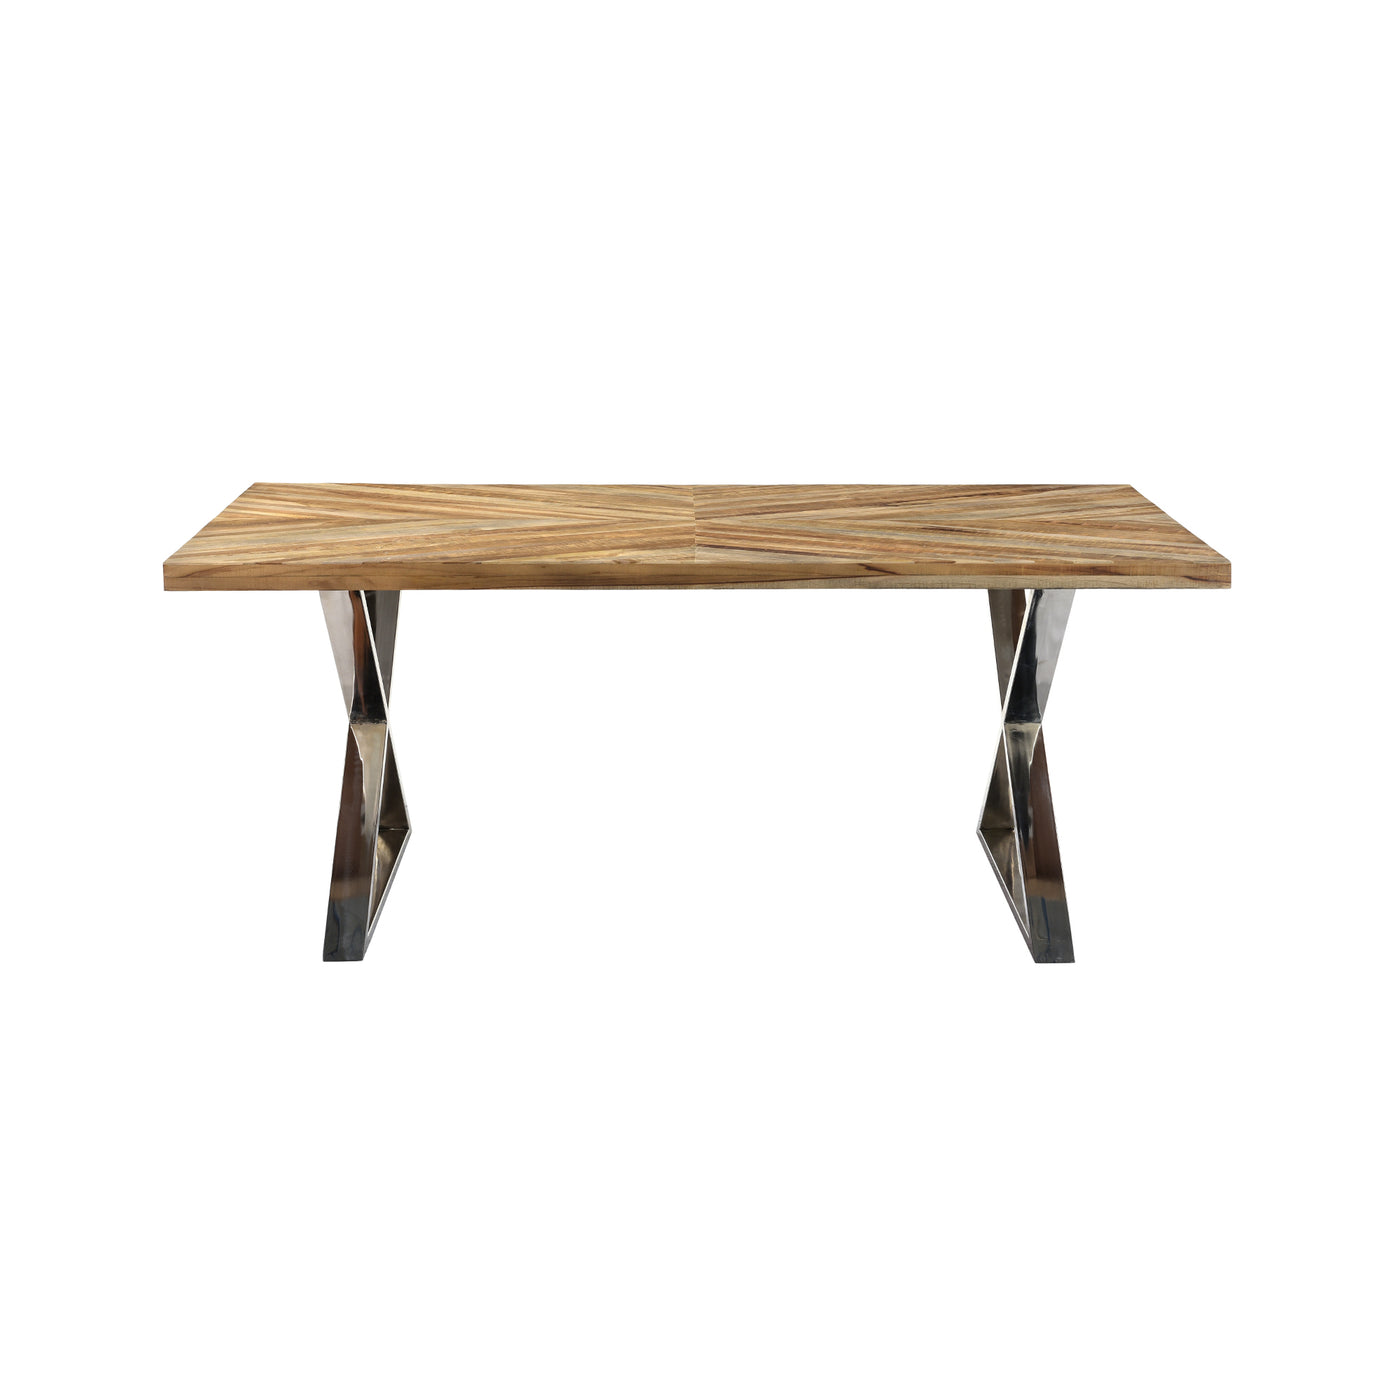 Matrix 6-Seat Dining Table in Natural Finish